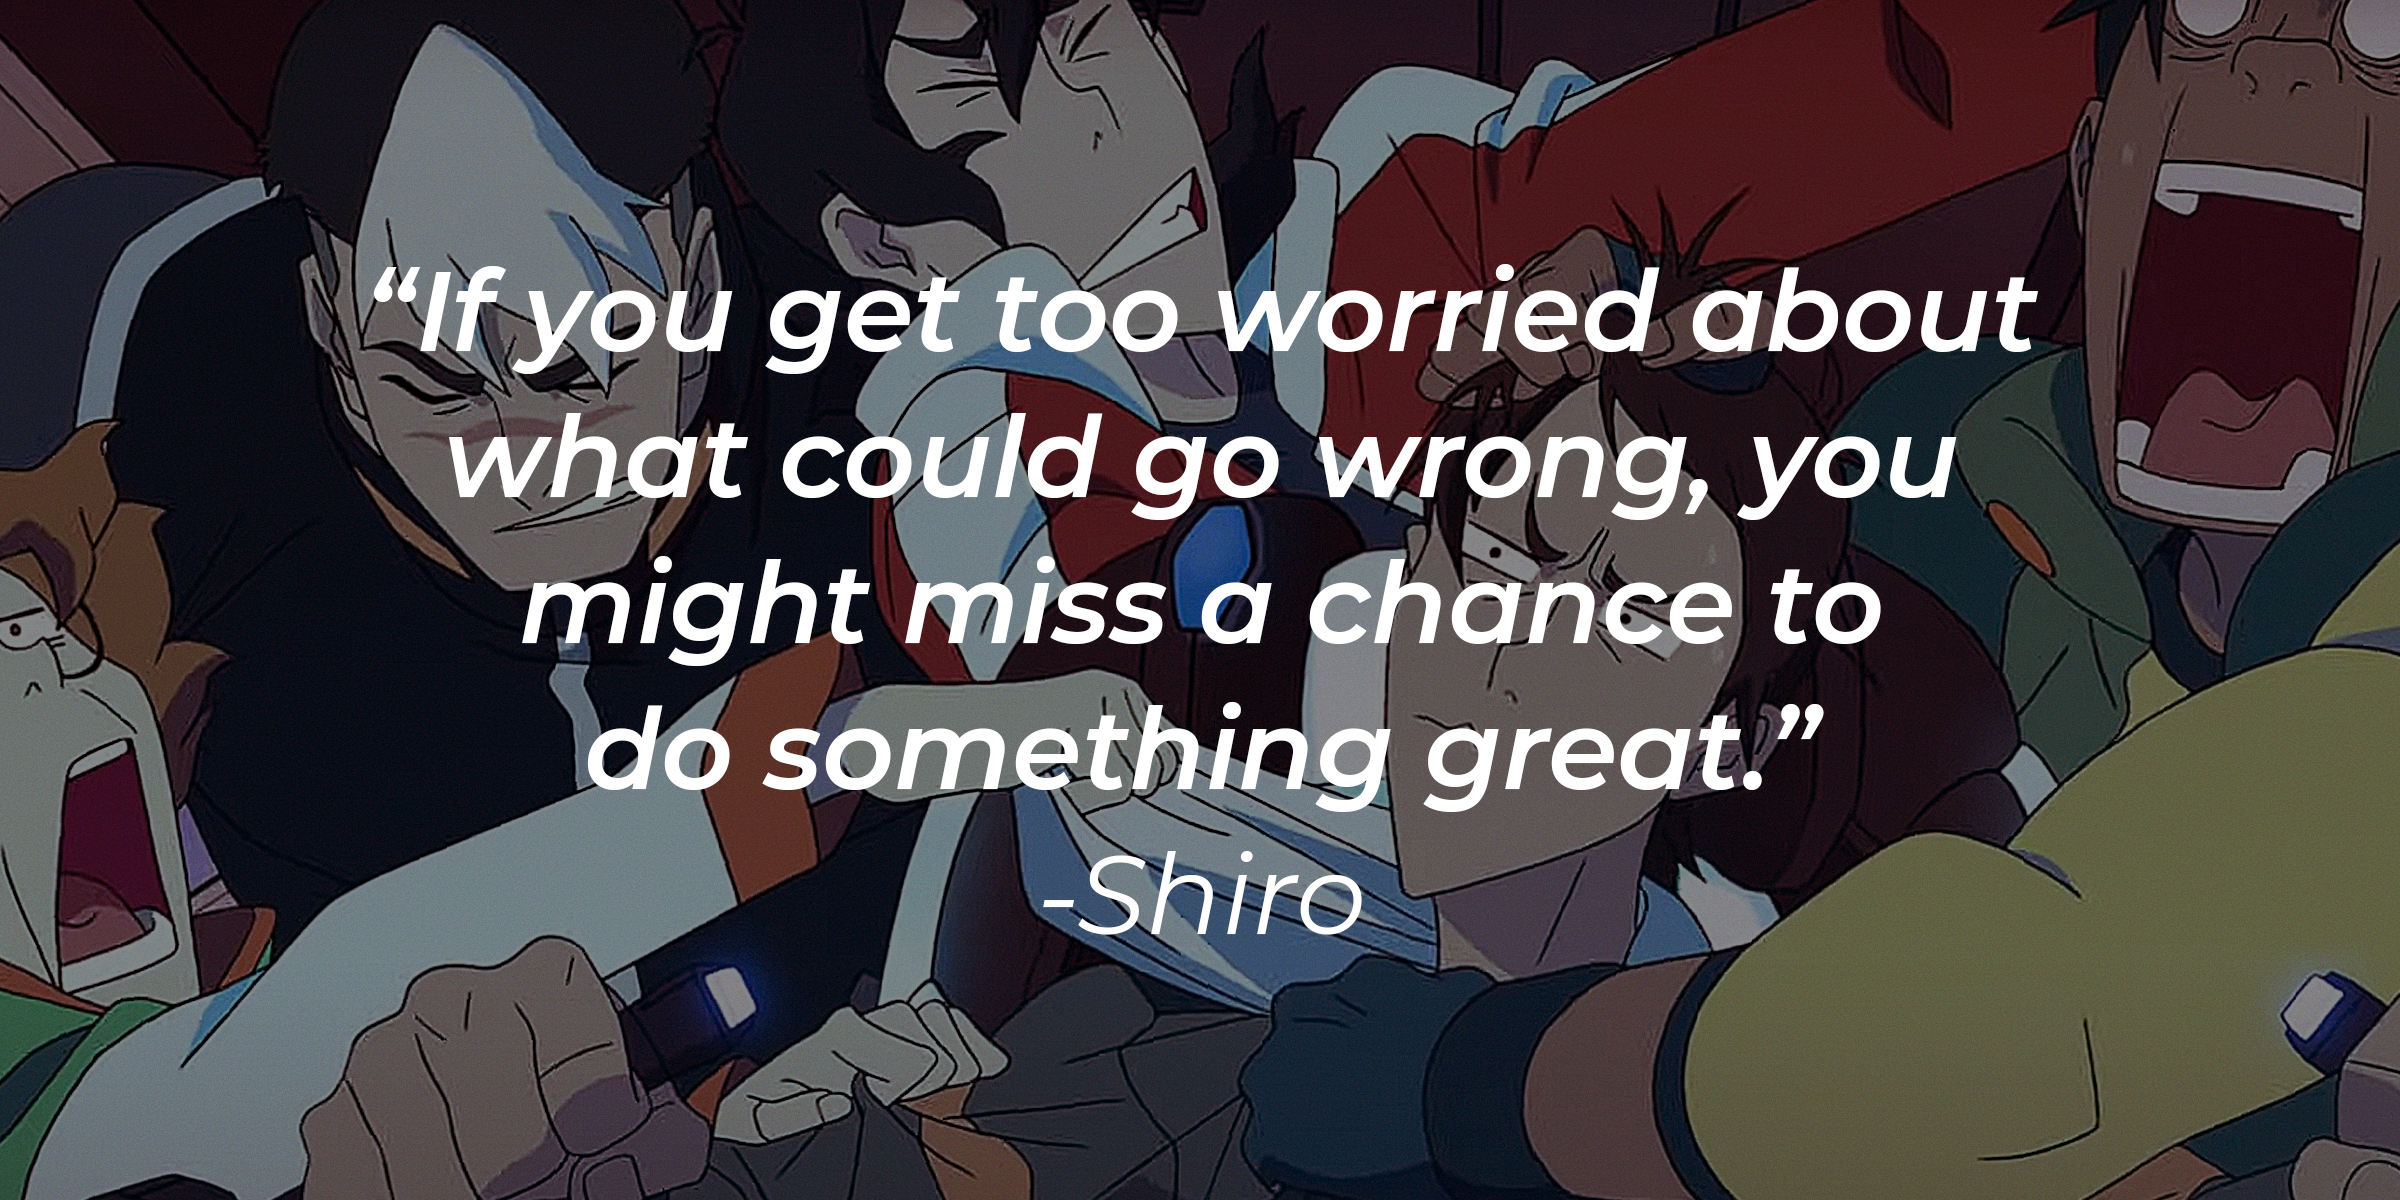 An image of the "Voltron" characters with Shiro's quote, "If you get too worried about what could go wrong, you might miss a chance to do something great." | Source: youtube.com/netflixafterschool